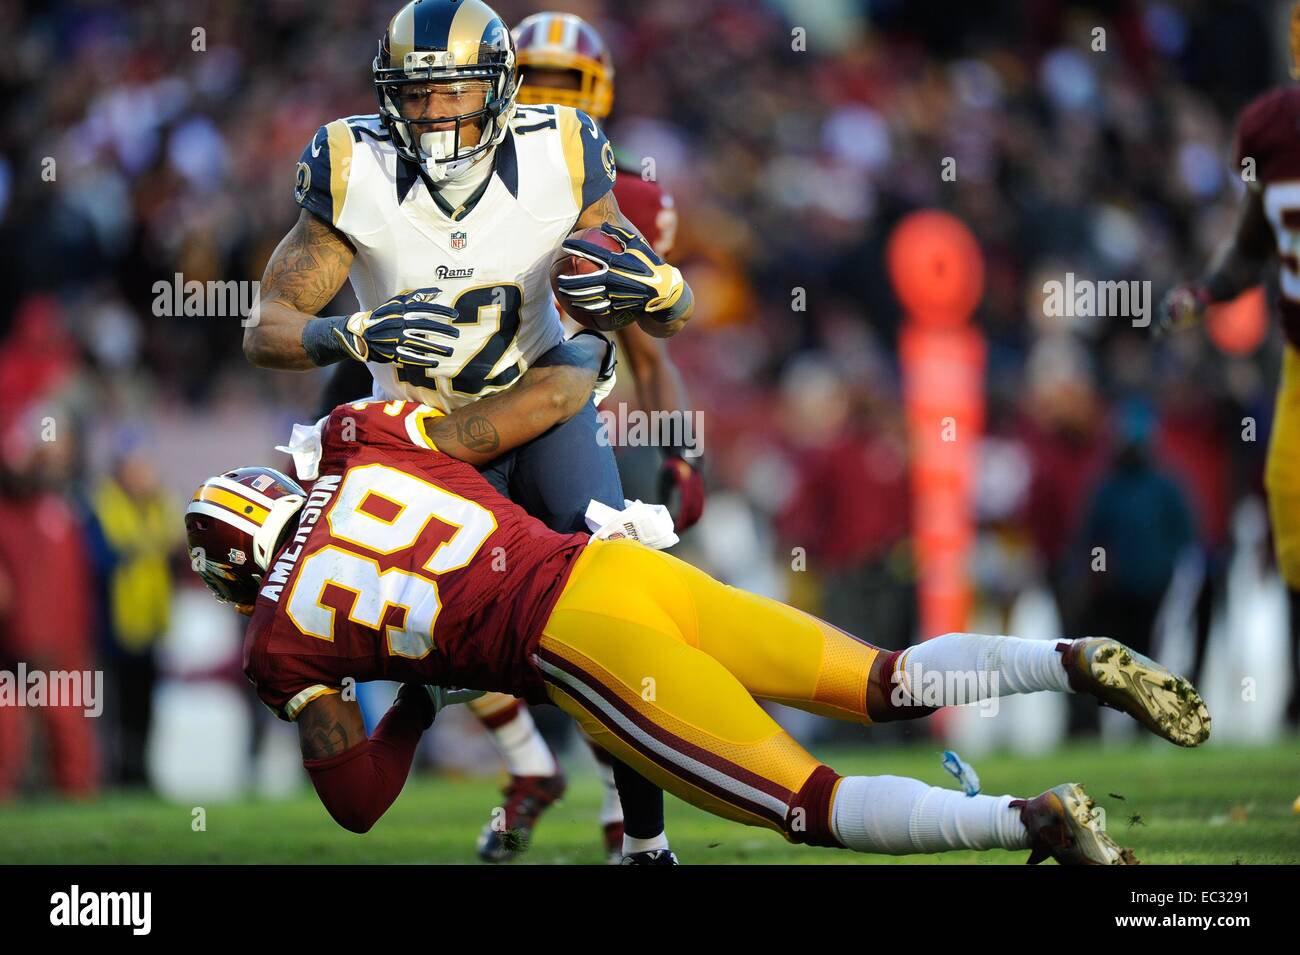 DEC 07, 2014 : Washington Redskins cornerback David Amerson (39) tries to tackle St. Louis Rams wide receiver Stedman Bailey (12) during the matchup between the St. Louis Rams and the Washington Redskins at FedEx Field in Landover, MD. Stock Photo